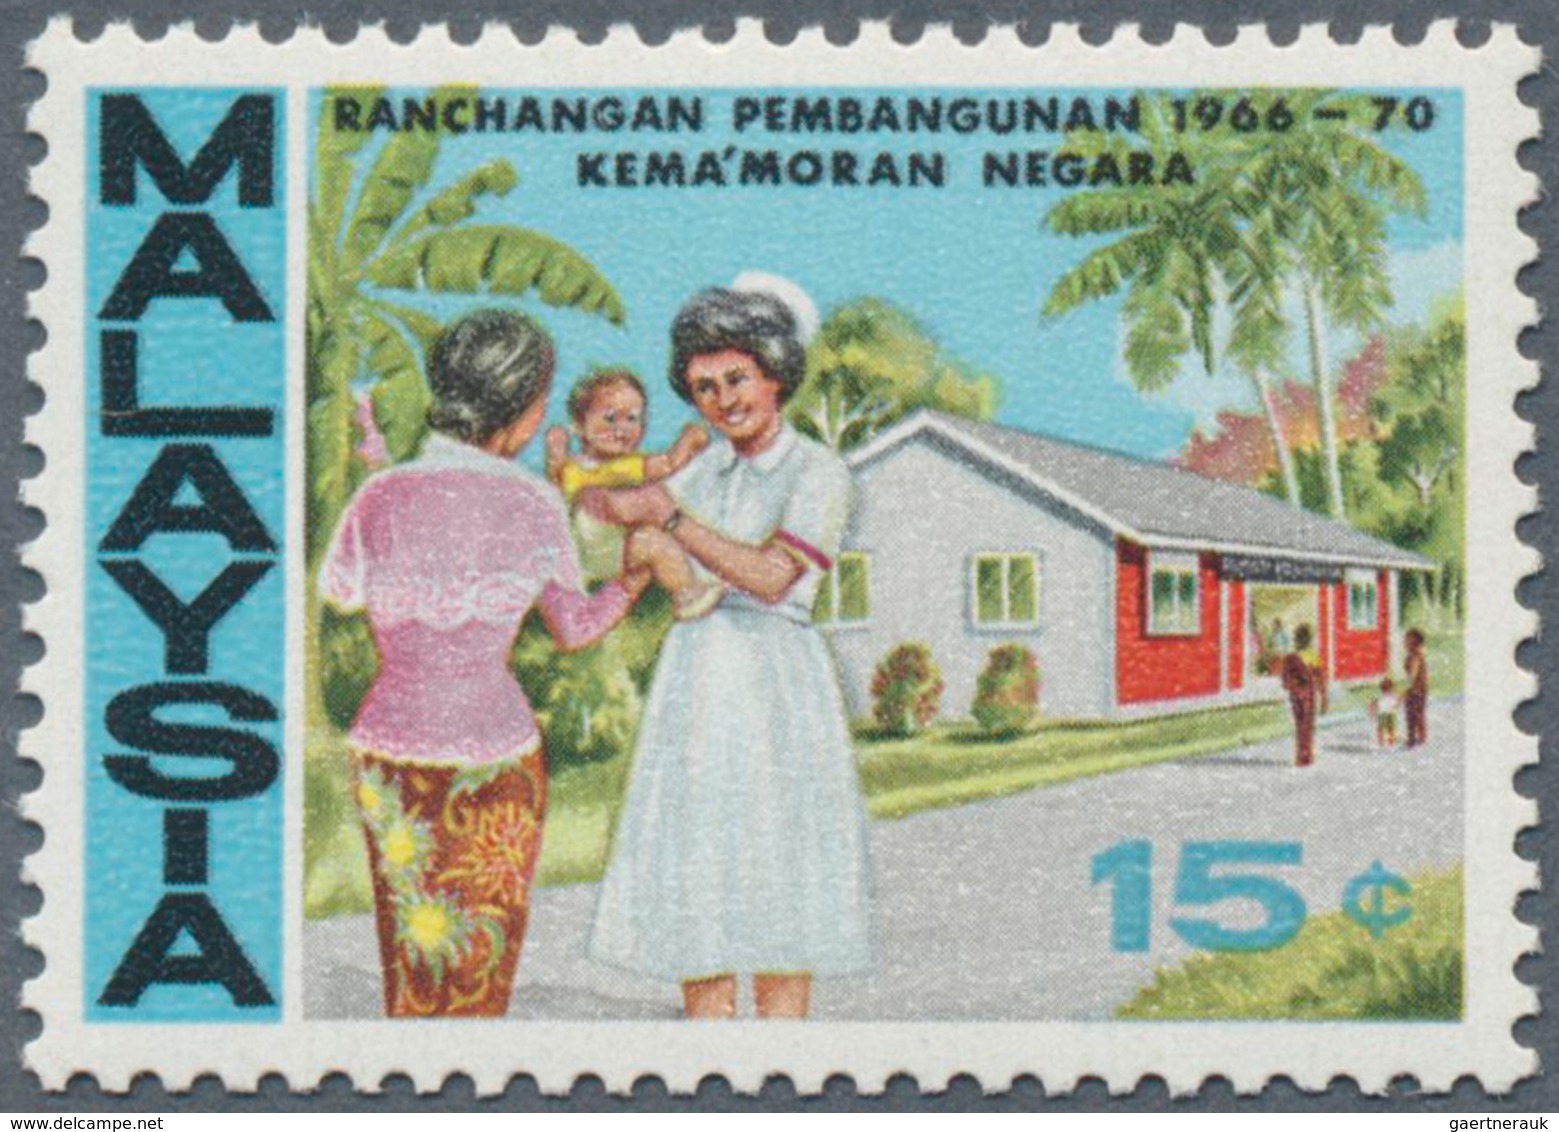 07494 Malaysia: 1966, First Malaysia Plan 15c. 'Rural Health' IMPERFORATE PROOF Affixed Into Official Pres - Malaysia (1964-...)